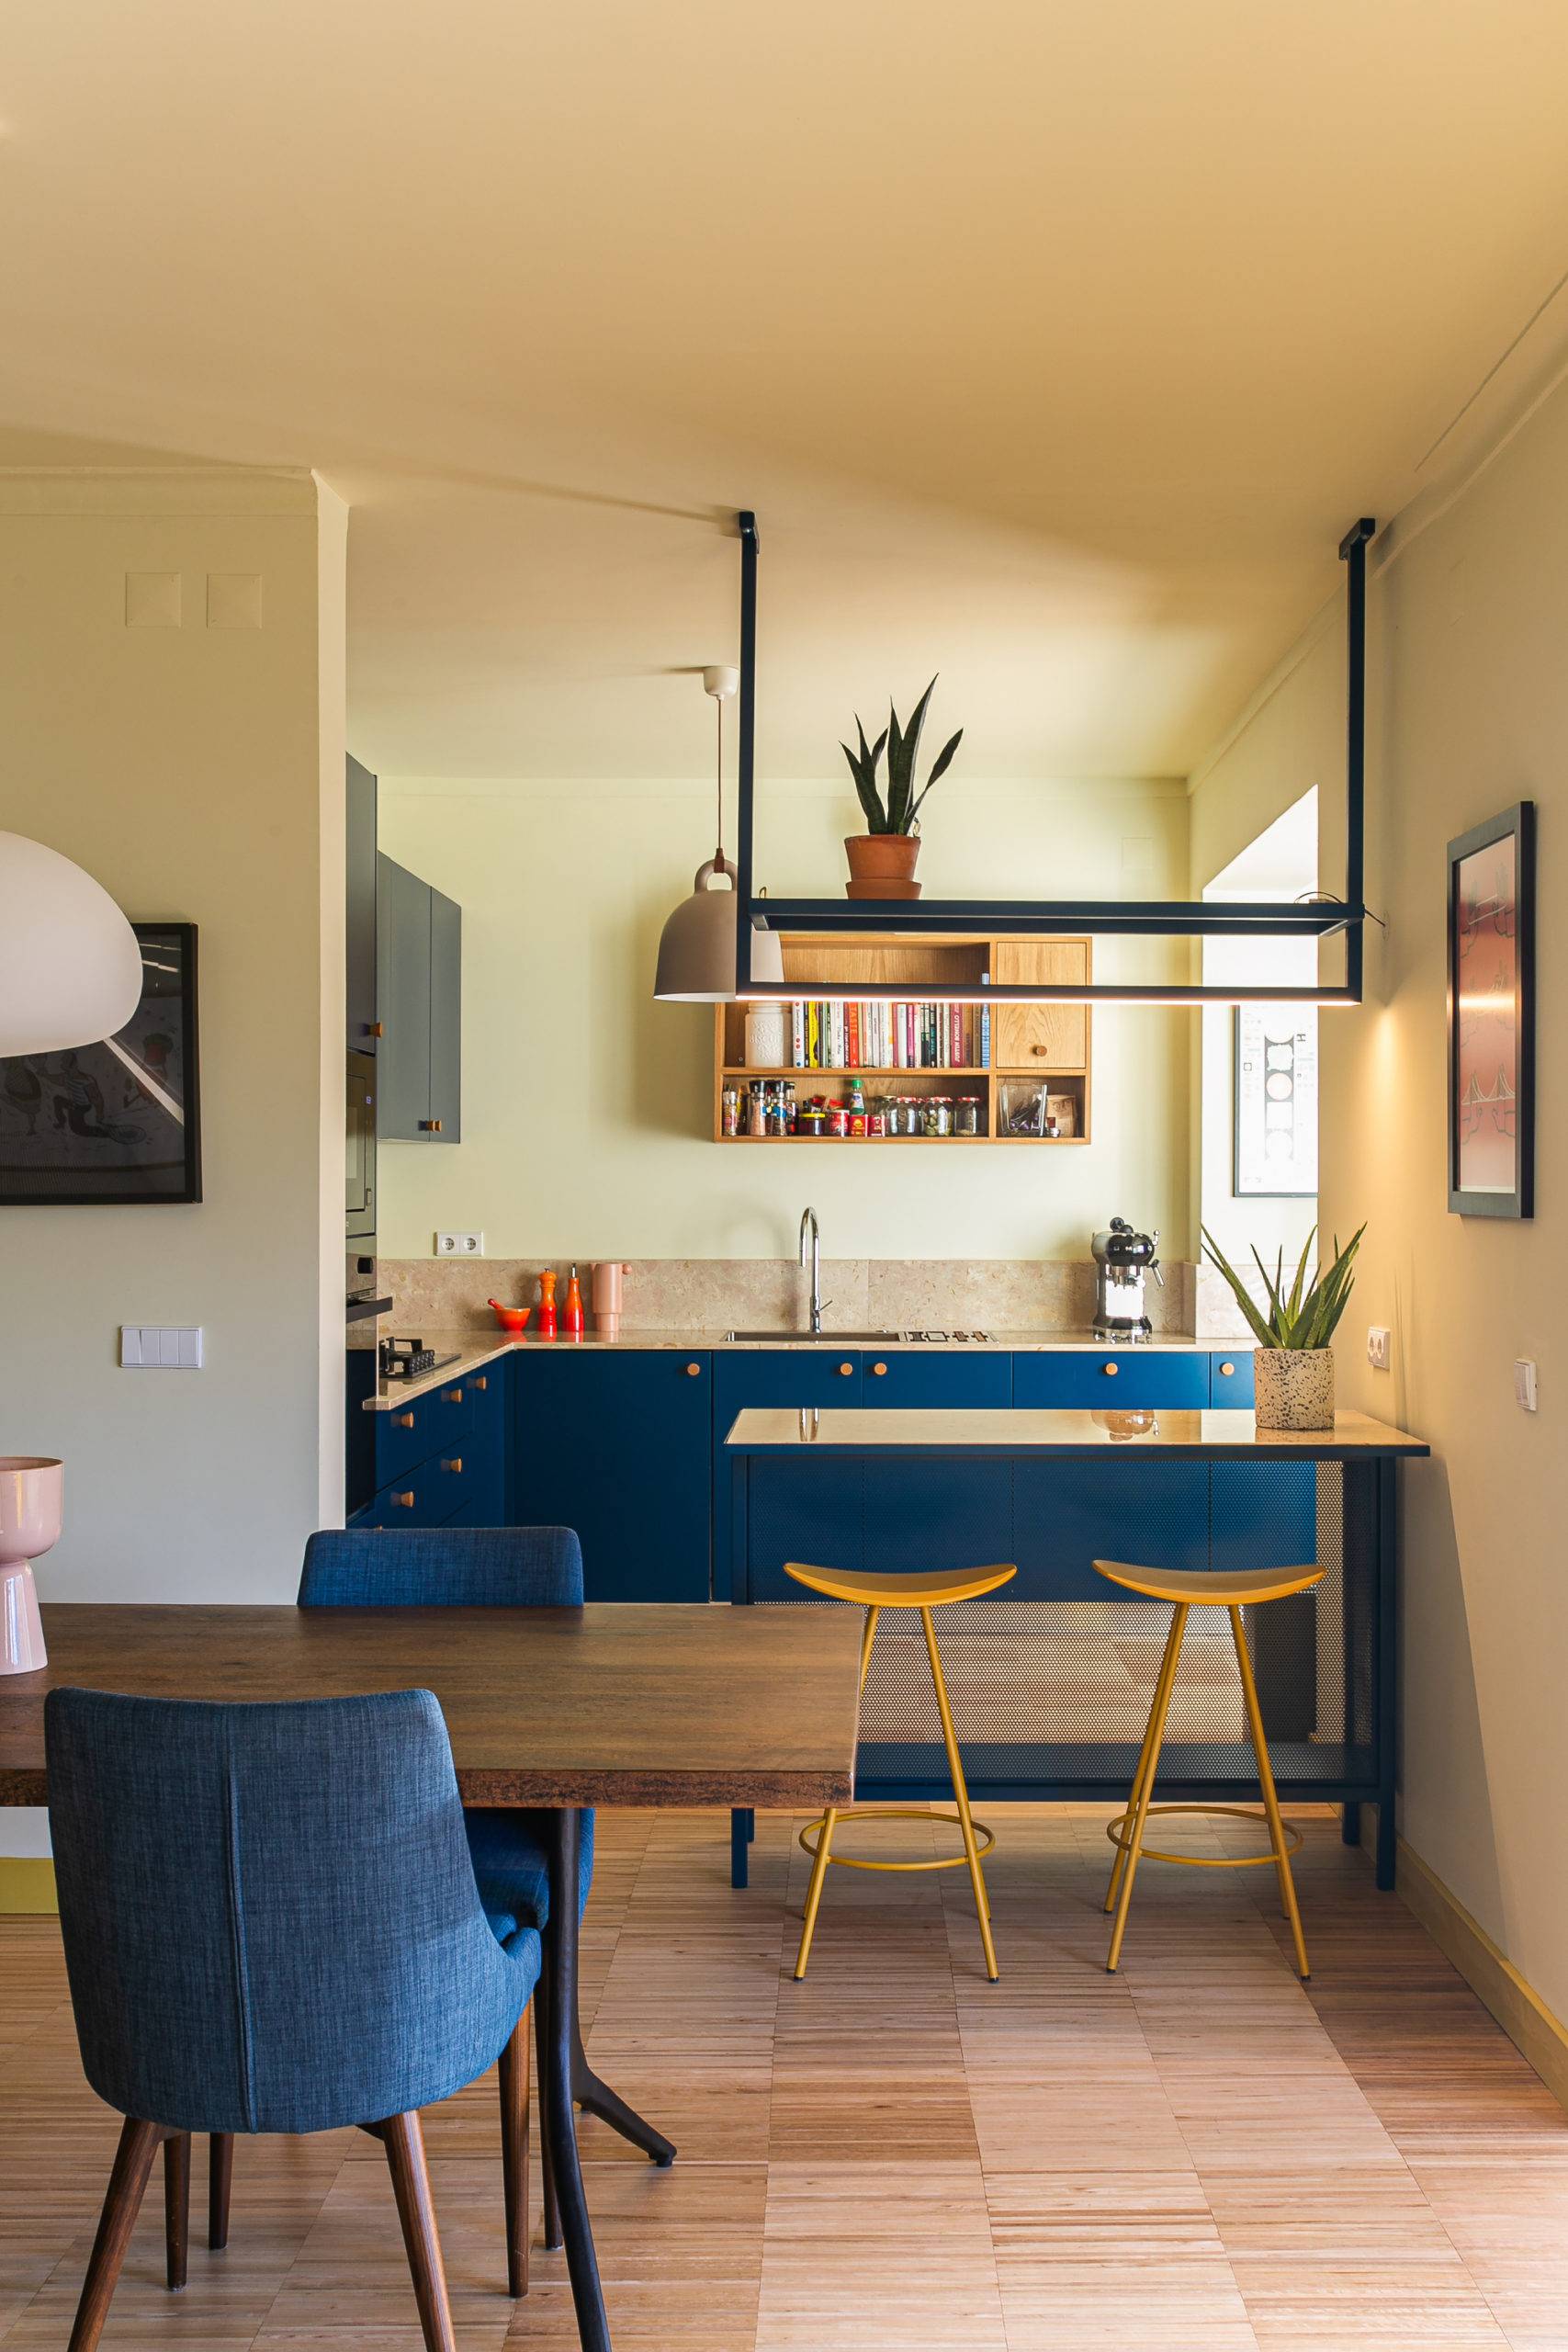 Kitchen and dining area of the apartment with ocean blue cabinets and yellow bar stools